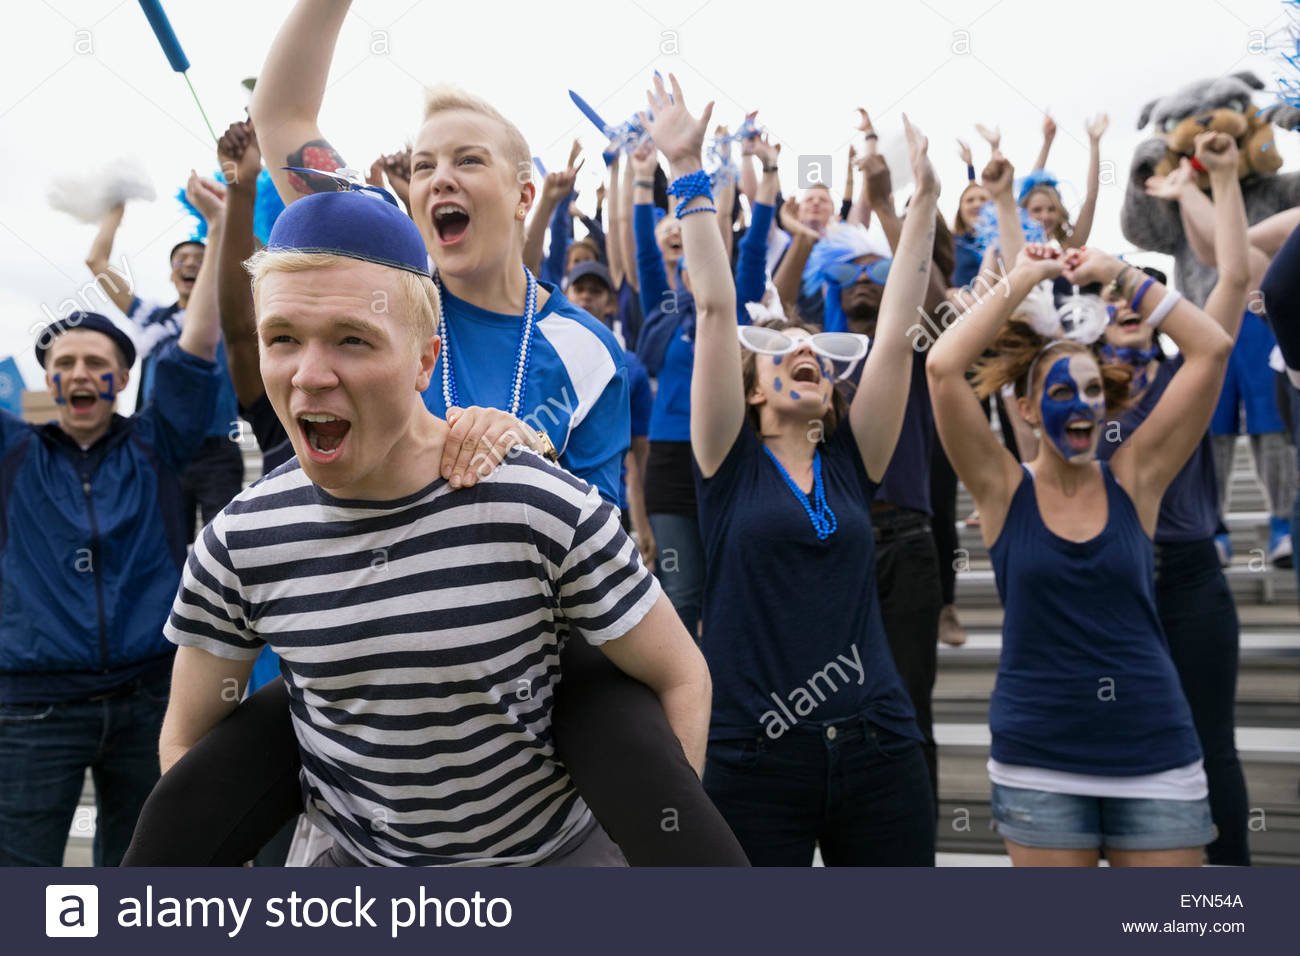 Enthusiastic fans in blue cheering bleachers sports event Stock Photo